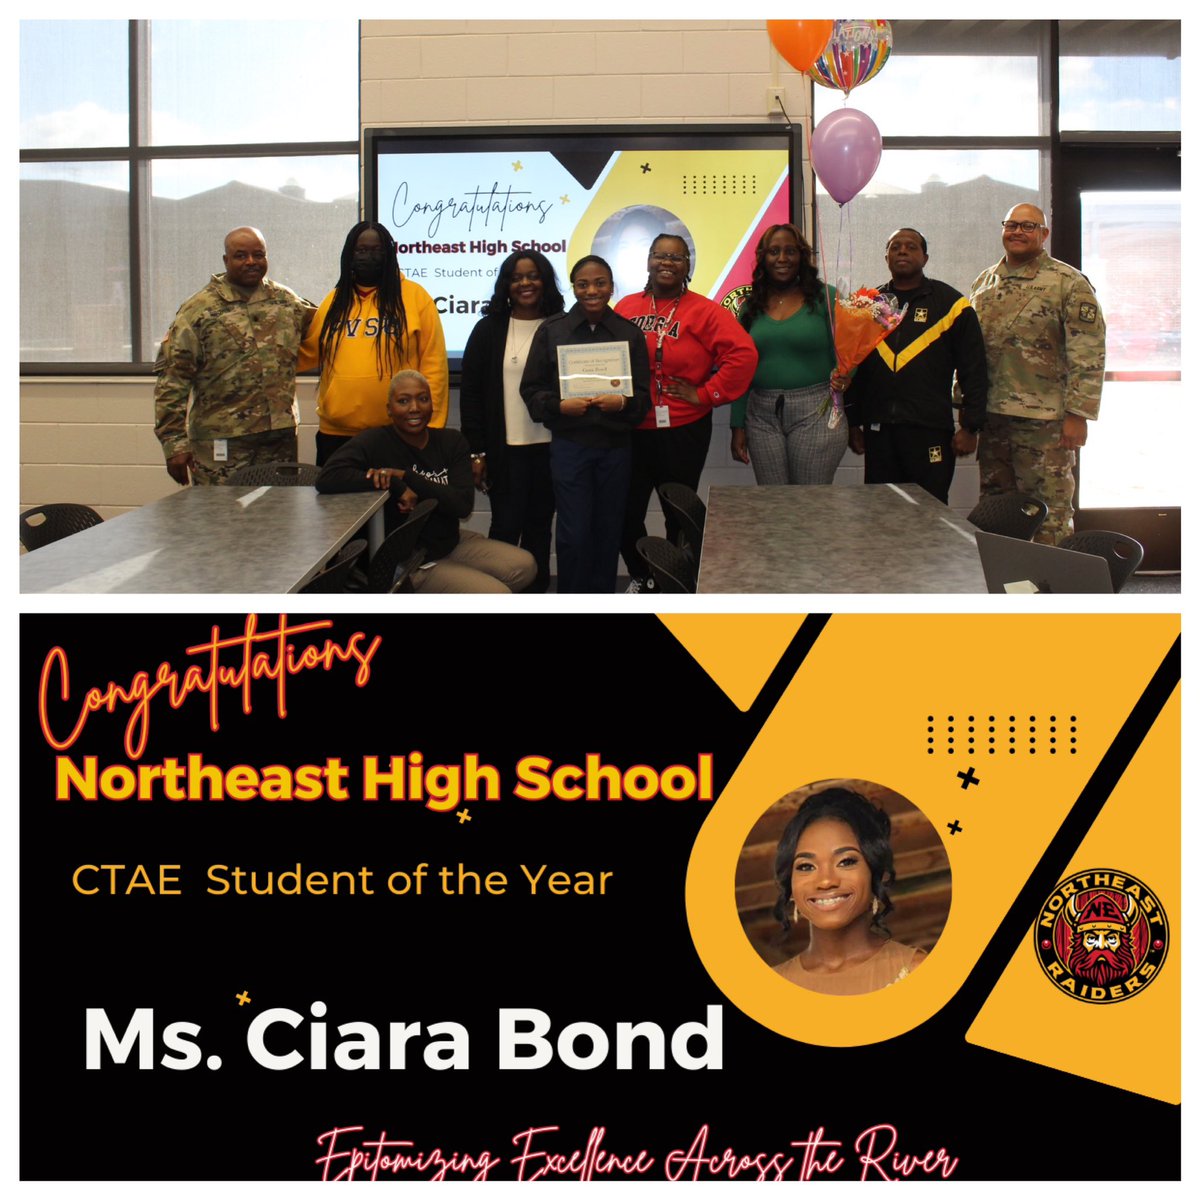 🌟 @NEHSRaiders celebrate Ciara Bond as our 2024 CTAE Student of the Year! 🏆 With unmatched poise and drive, Ciara represents the BEST of NEHS. Let's cheer her on as she competes for Bibb County School District CTAE Student of the Year. Go, Ciara! 🎉#NEHSPRIDE @BibbSchools